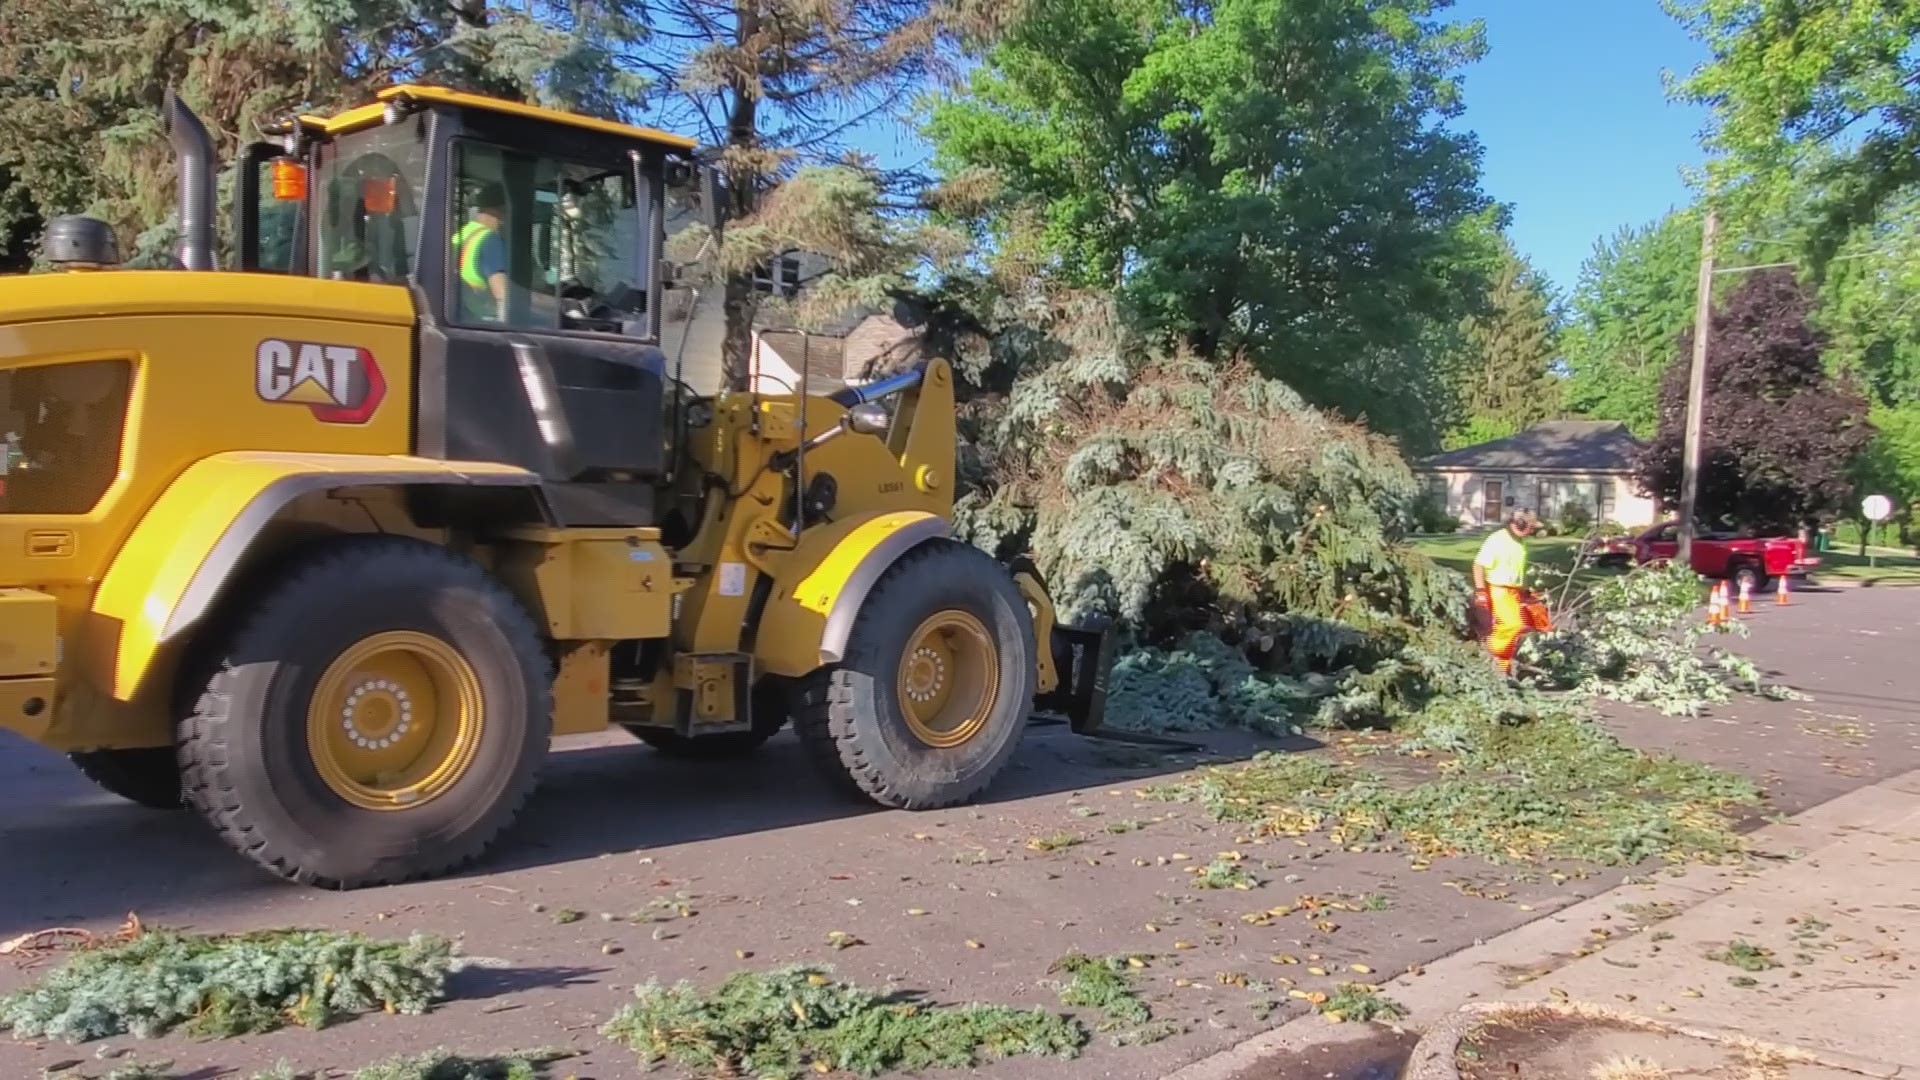 Residents and city crews in Robbinsdale are in serious cleanup mode after a storm system tore through on Friday, knocking down trees or ripping them from the ground.